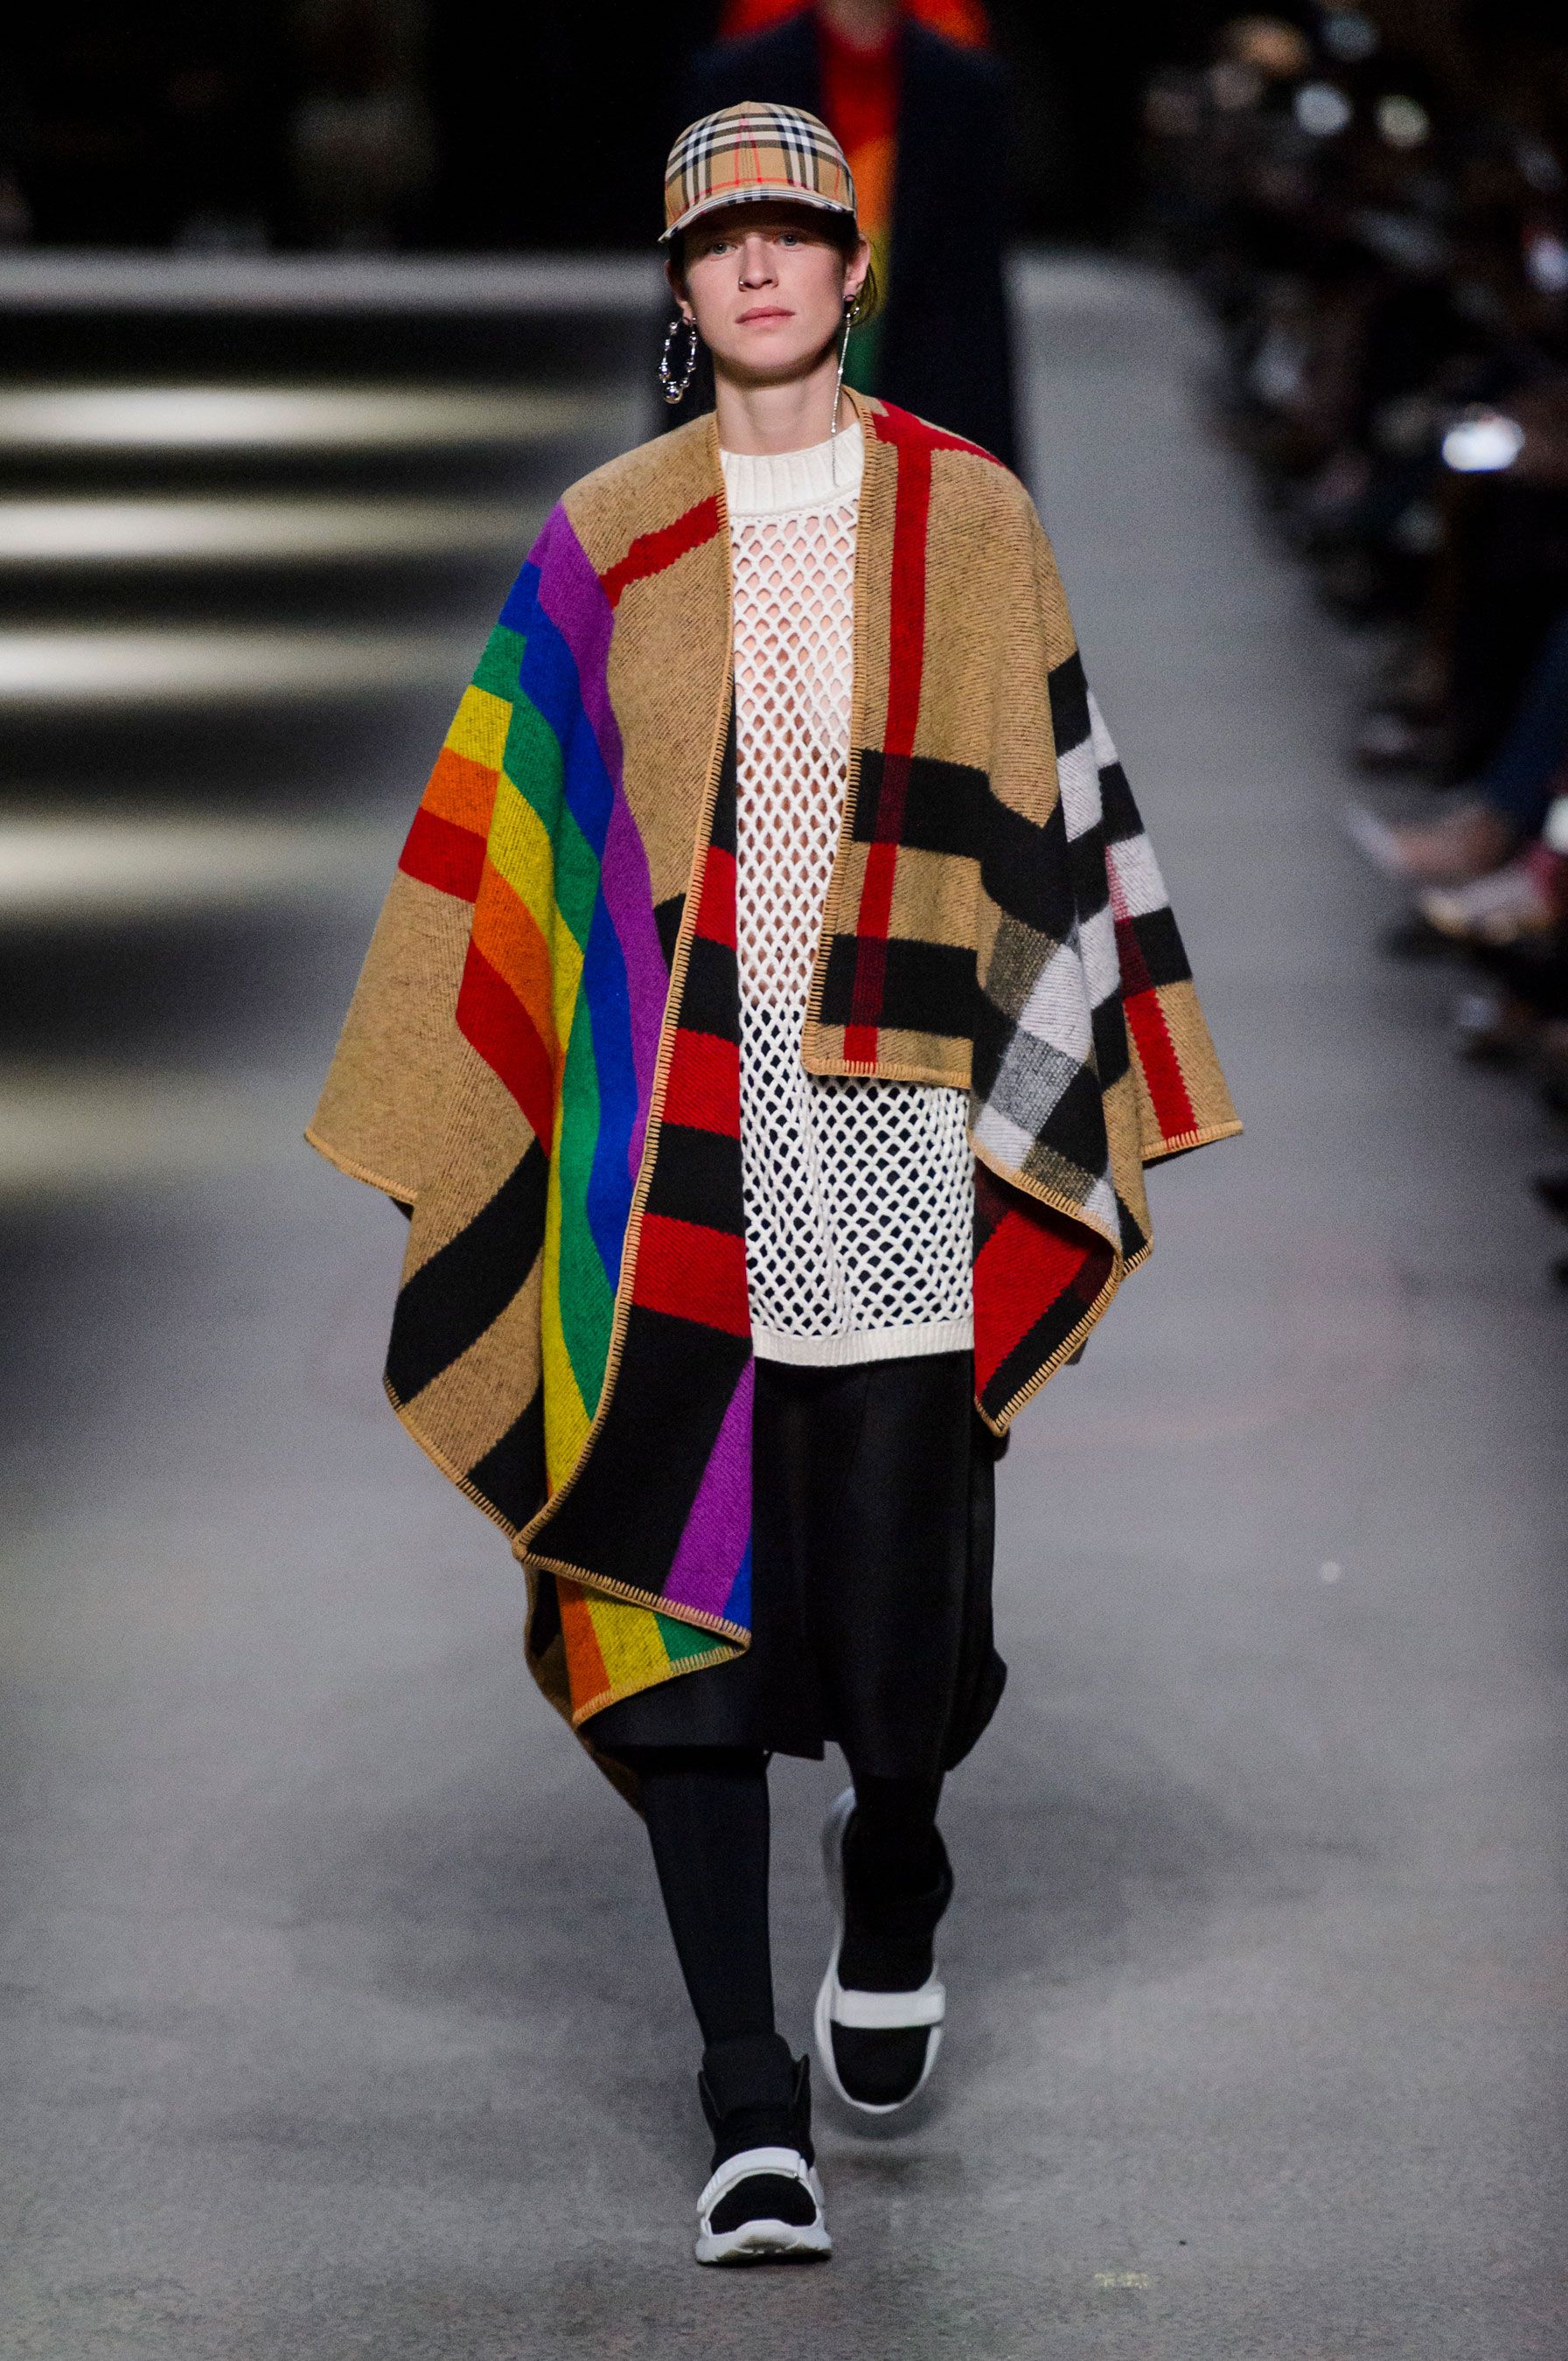 84 Looks From Burberry Fall 2018 Show – Burberry at London Fashion